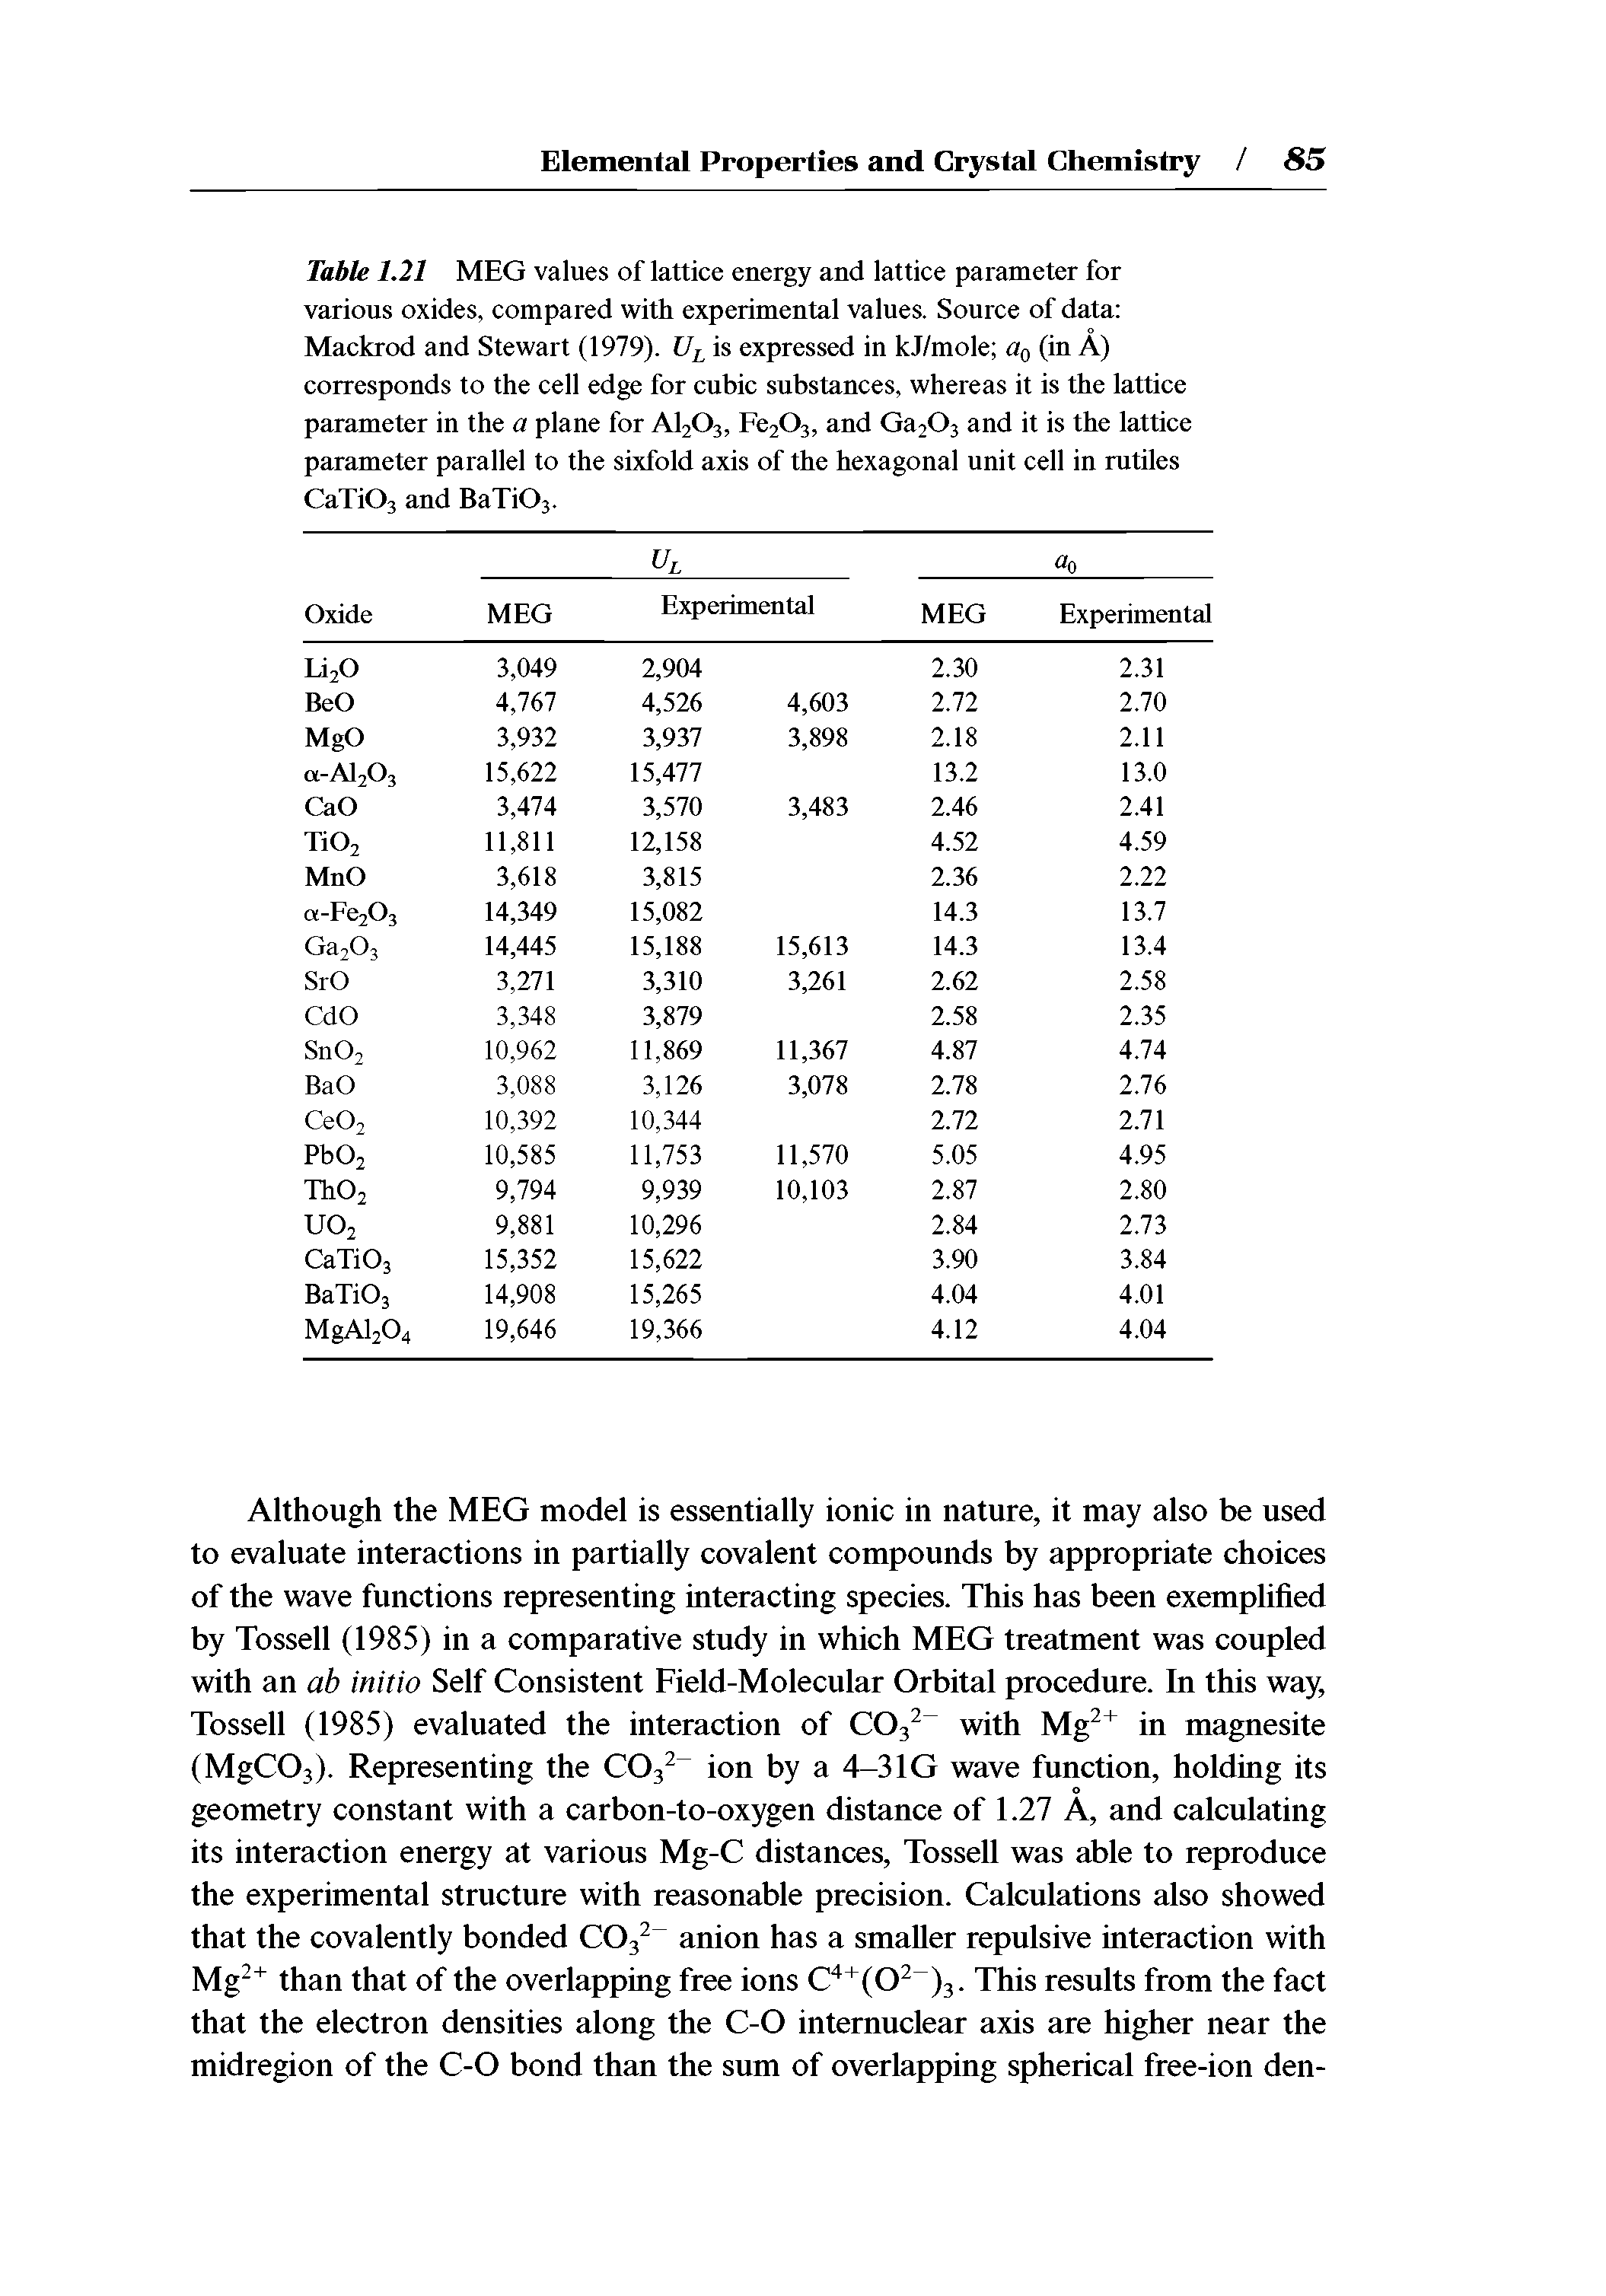 Table 1.21 MEG values of lattice energy and lattice parameter for varions oxides, compared with experimental values. Source of data Mackrod and Stewart (1979). C/ is expressed in kJ/mole (in A) corresponds to the cell edge for cnbic snbstances, whereas it is the lattice parameter in the a plane for AI2O3, Fe203, and Ga203 and it is the lattice parameter parallel to the sixfold axis of the hexagonal unit cell in mtiles CaTi03 and BaTi03.